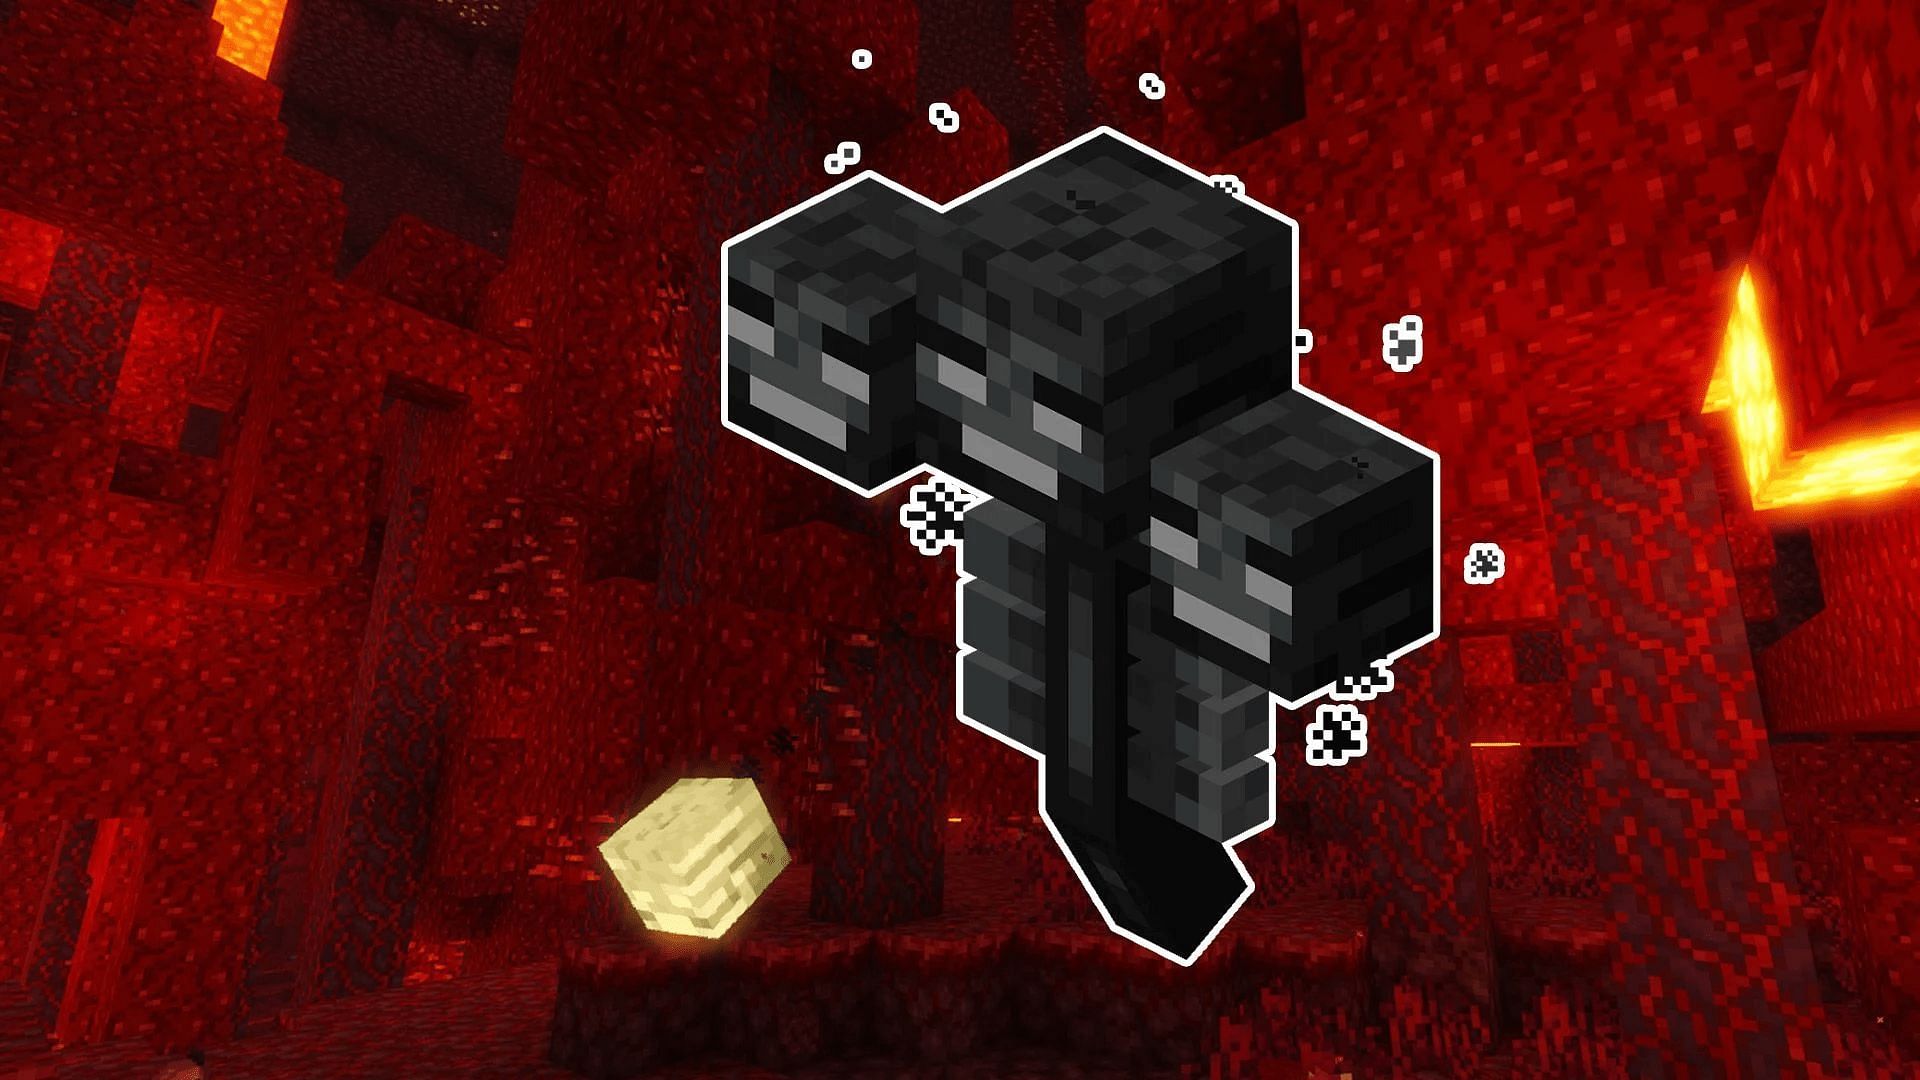 The Wither boss in Minecraft can have some interesting applications (Image via Mojang)